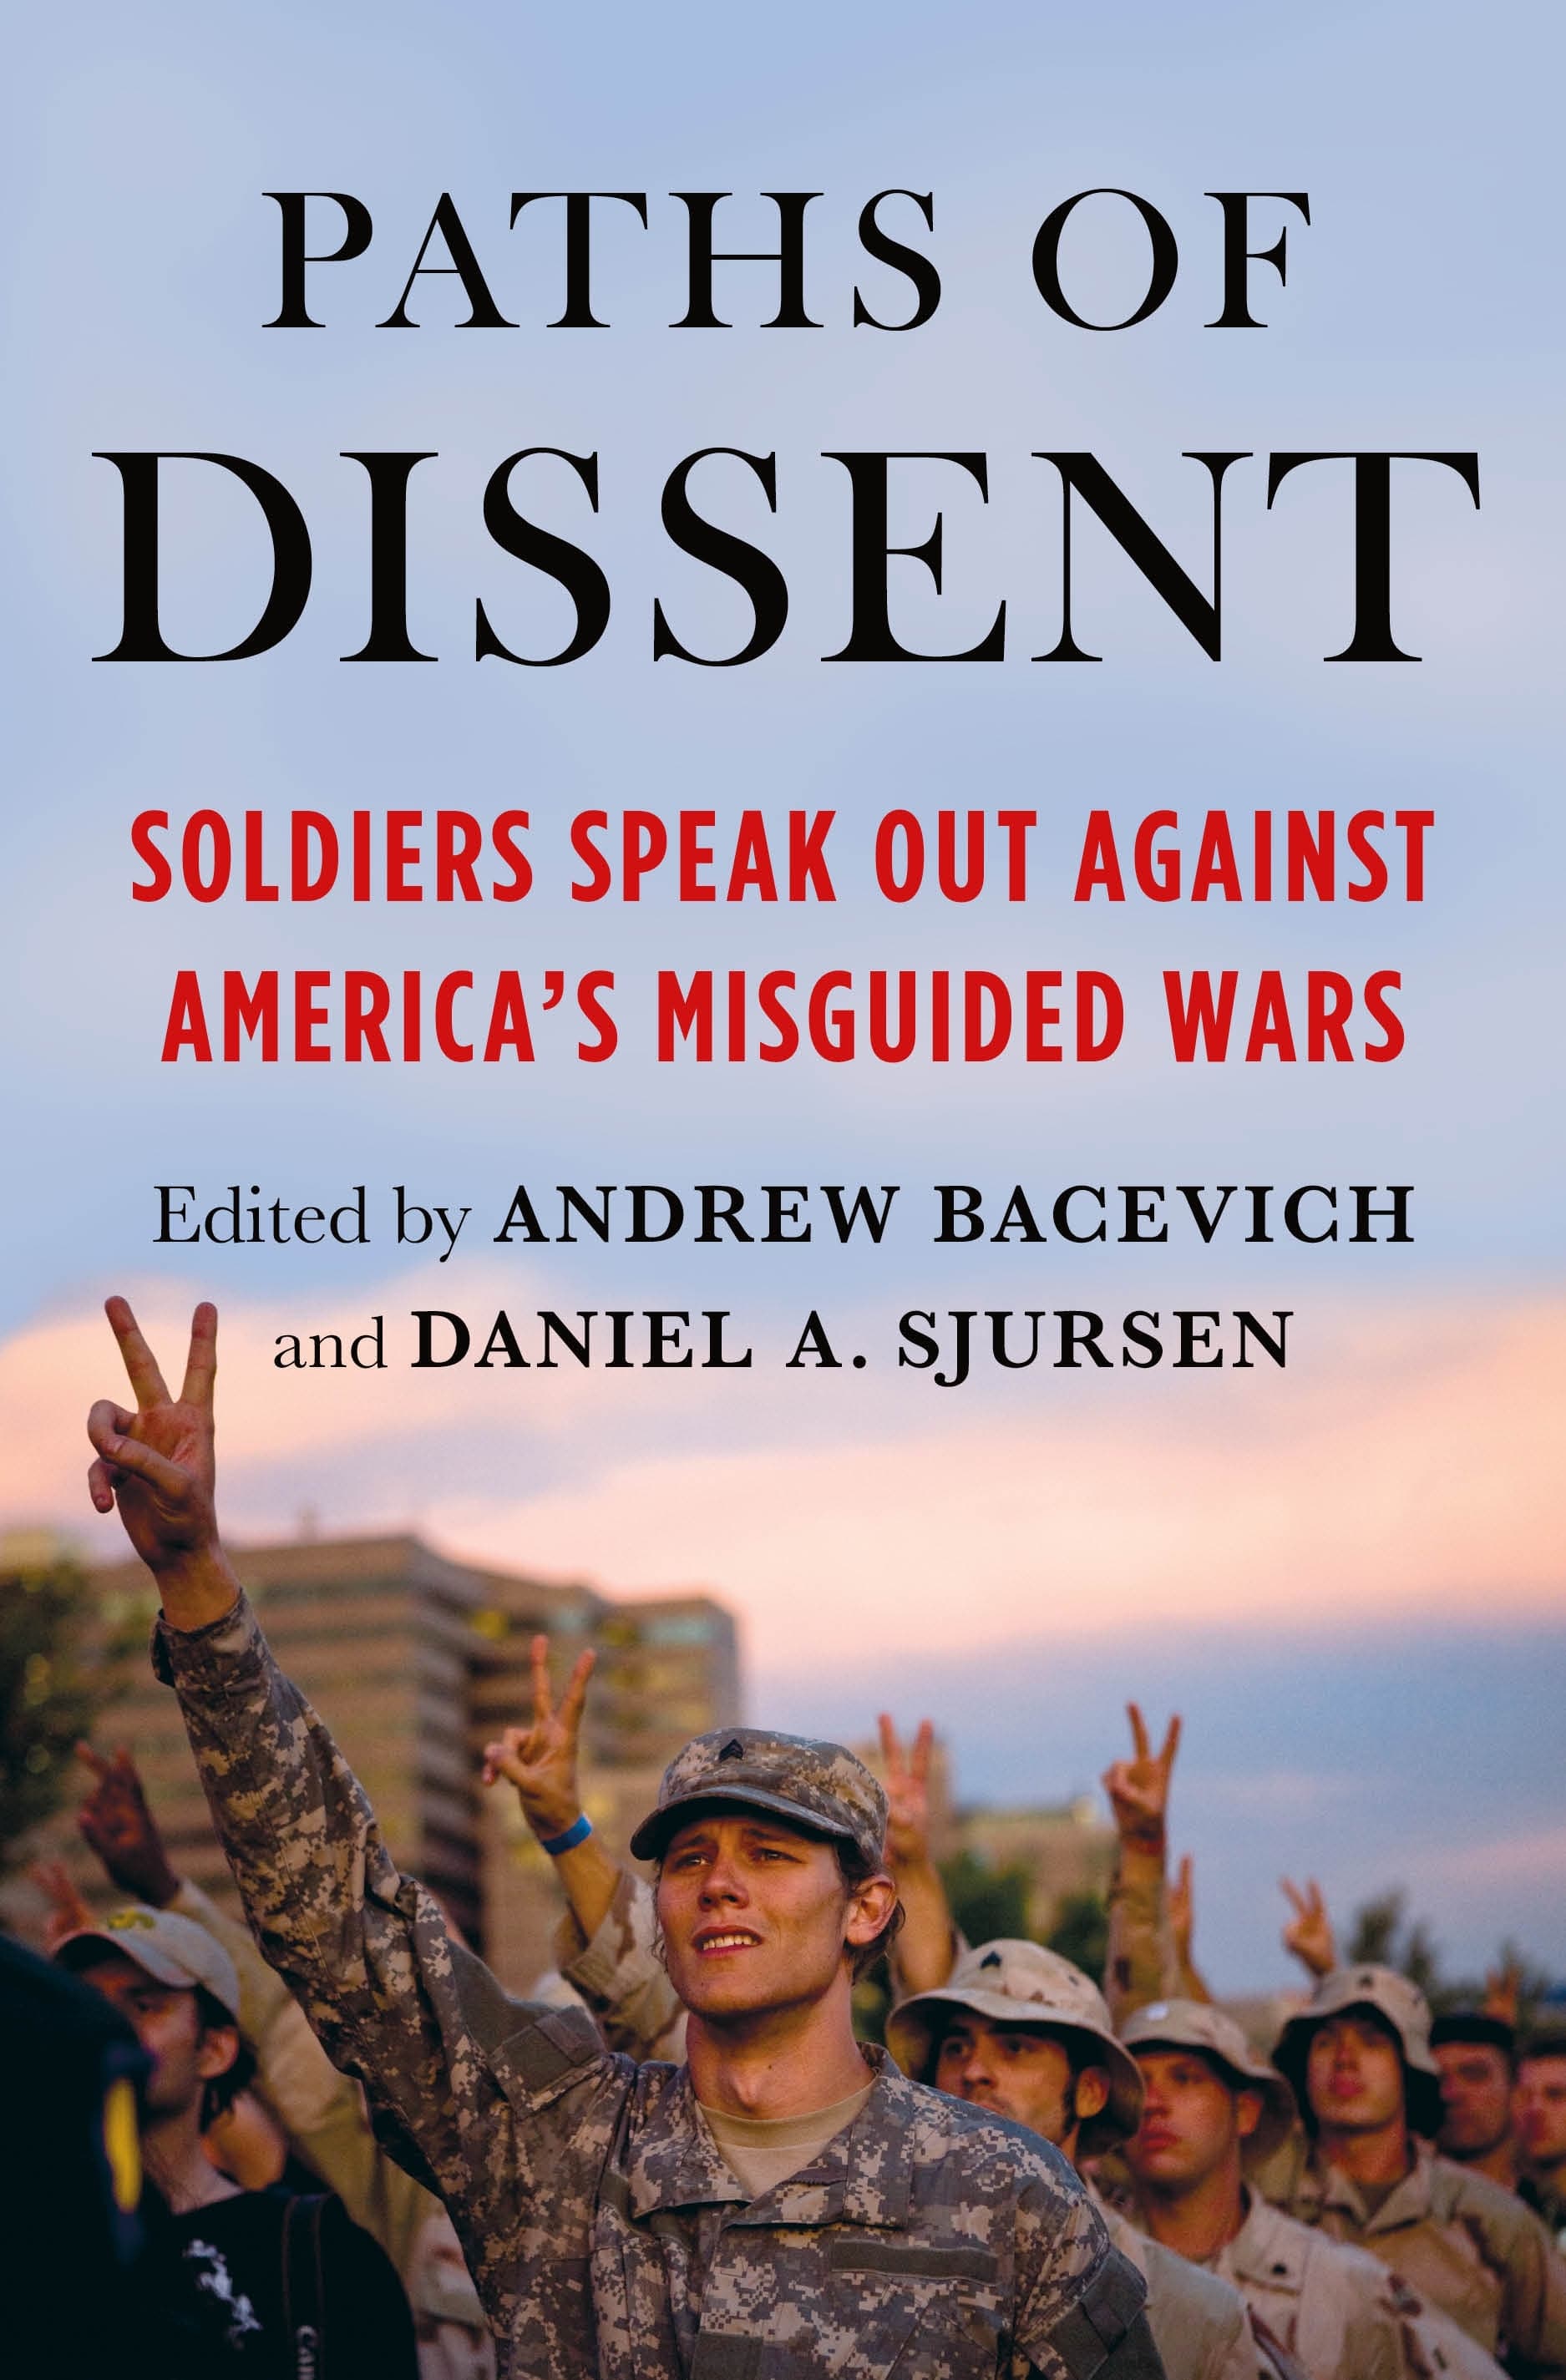 Paths of Dissent cover. (Courtesy of Andrew Bacevich)